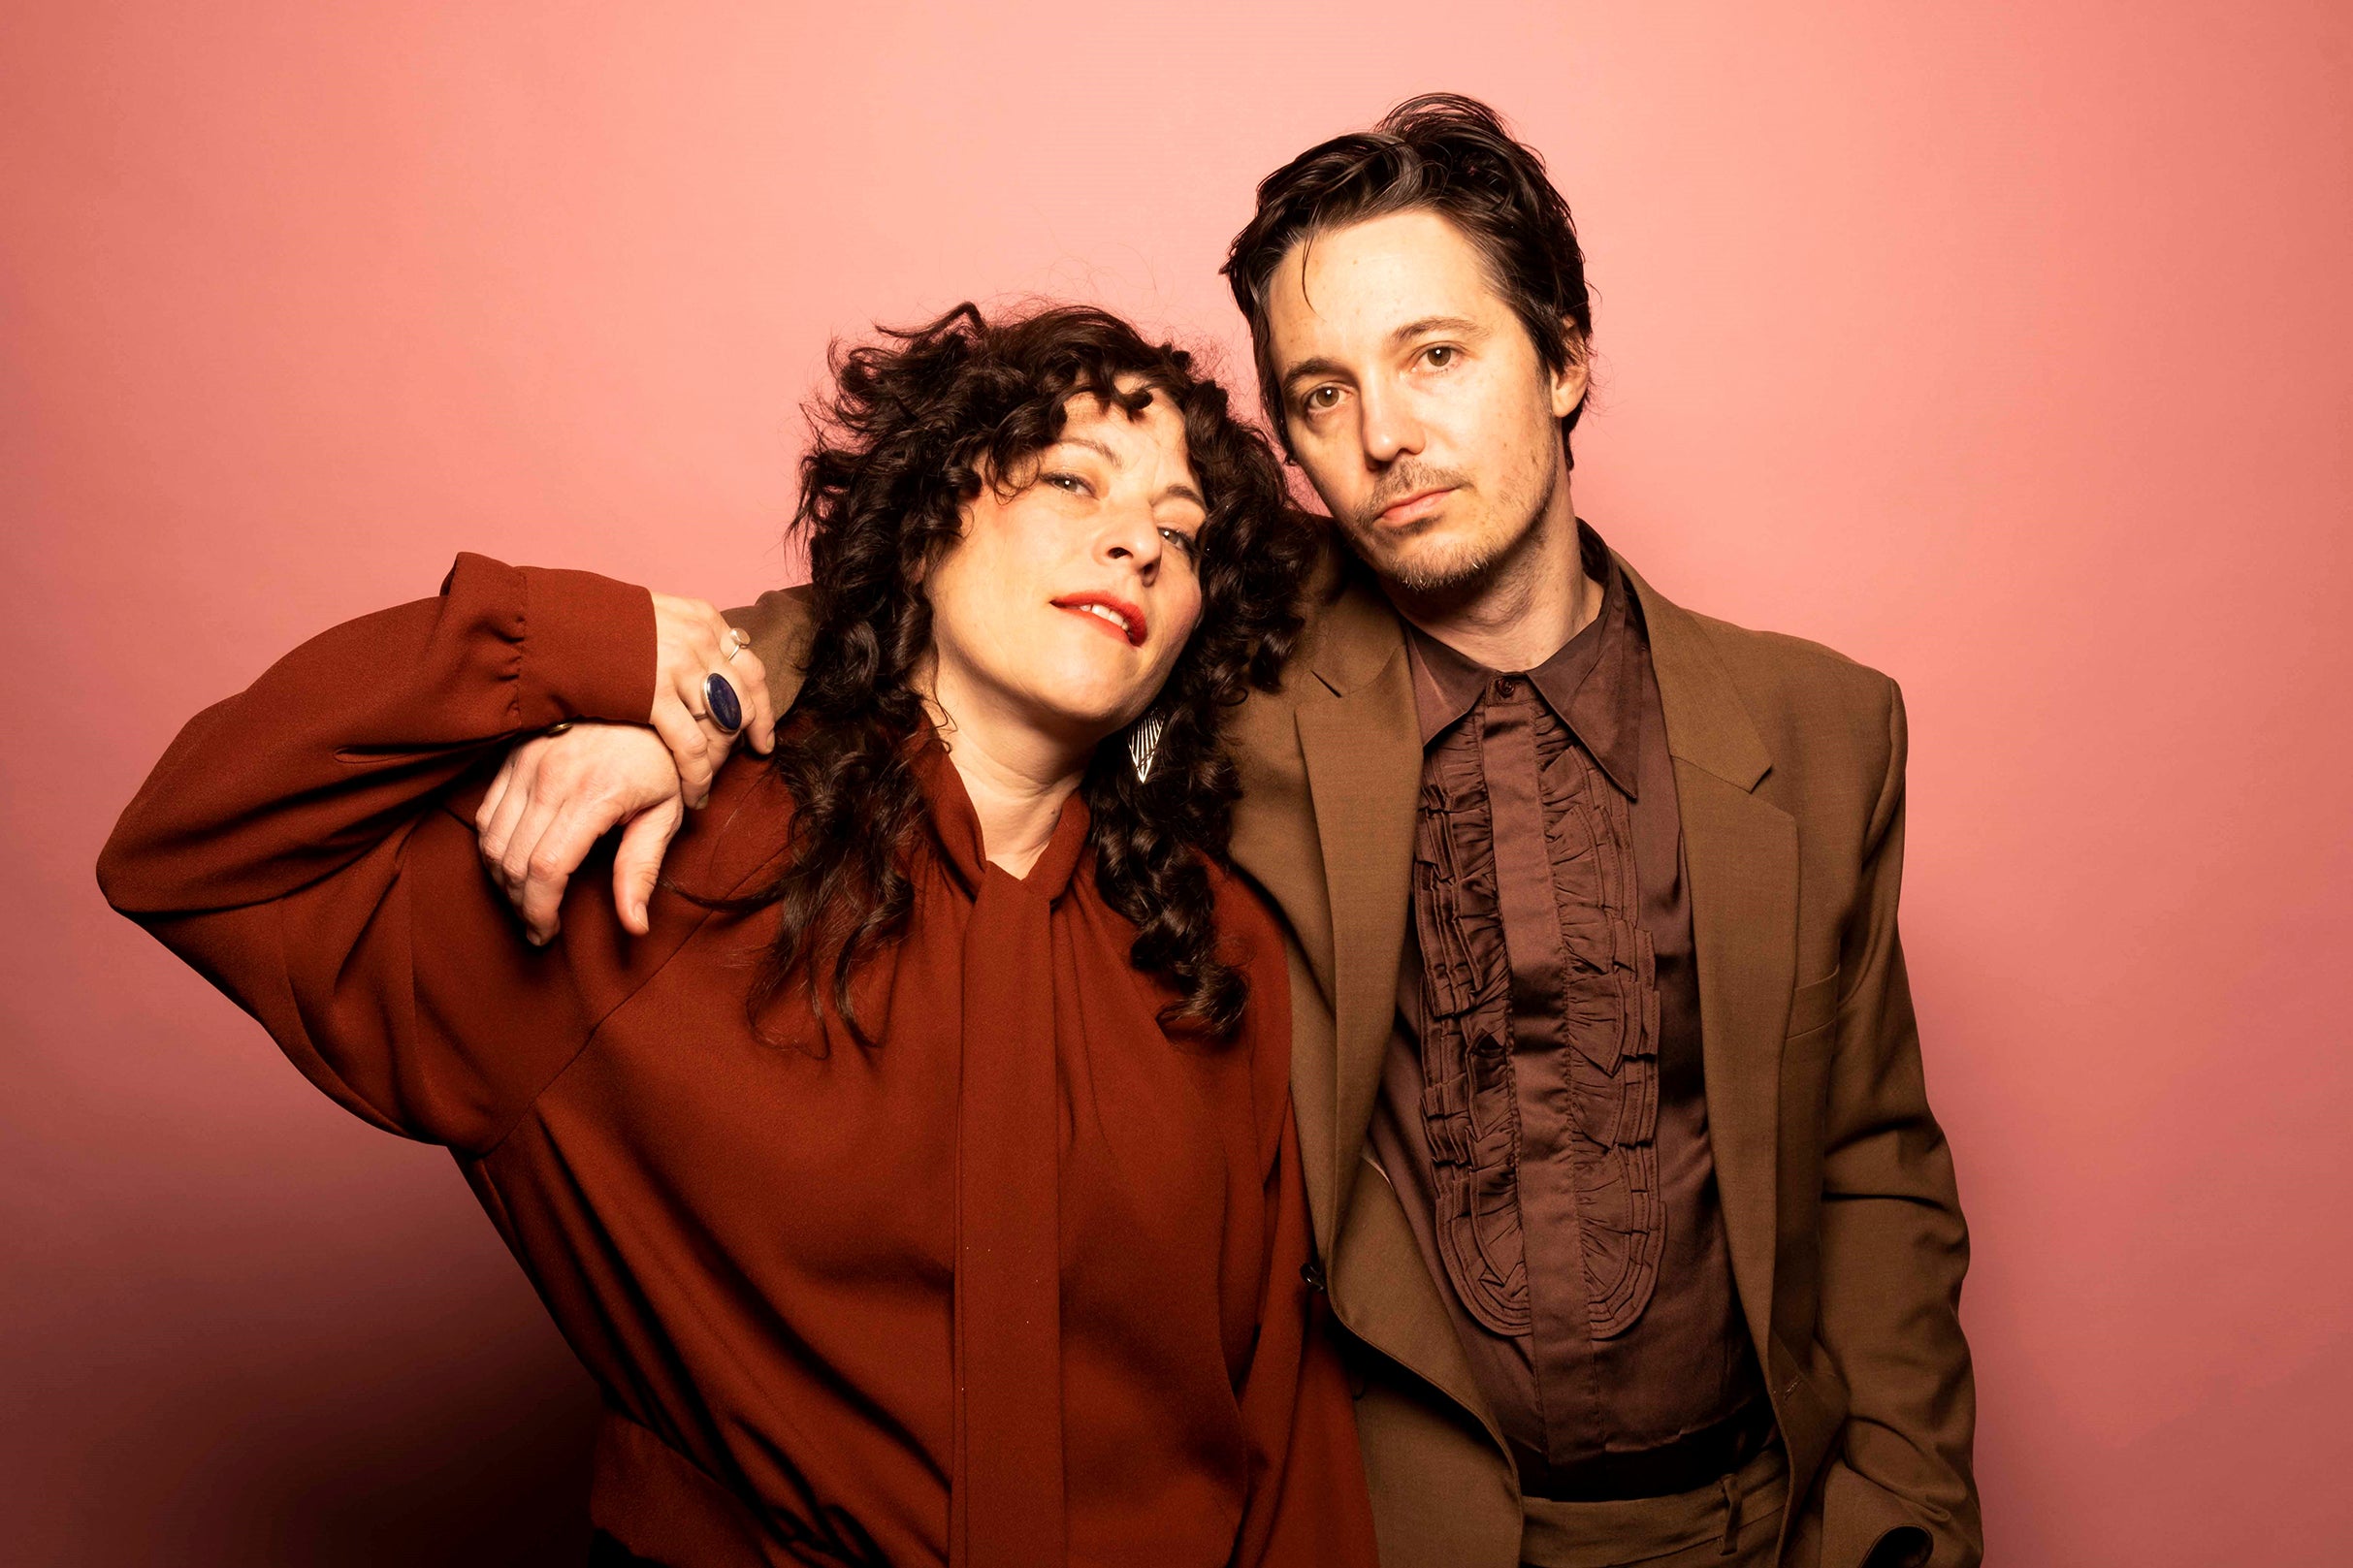 Shovels & Rope in Seattle promo photo for VIP Package presale offer code